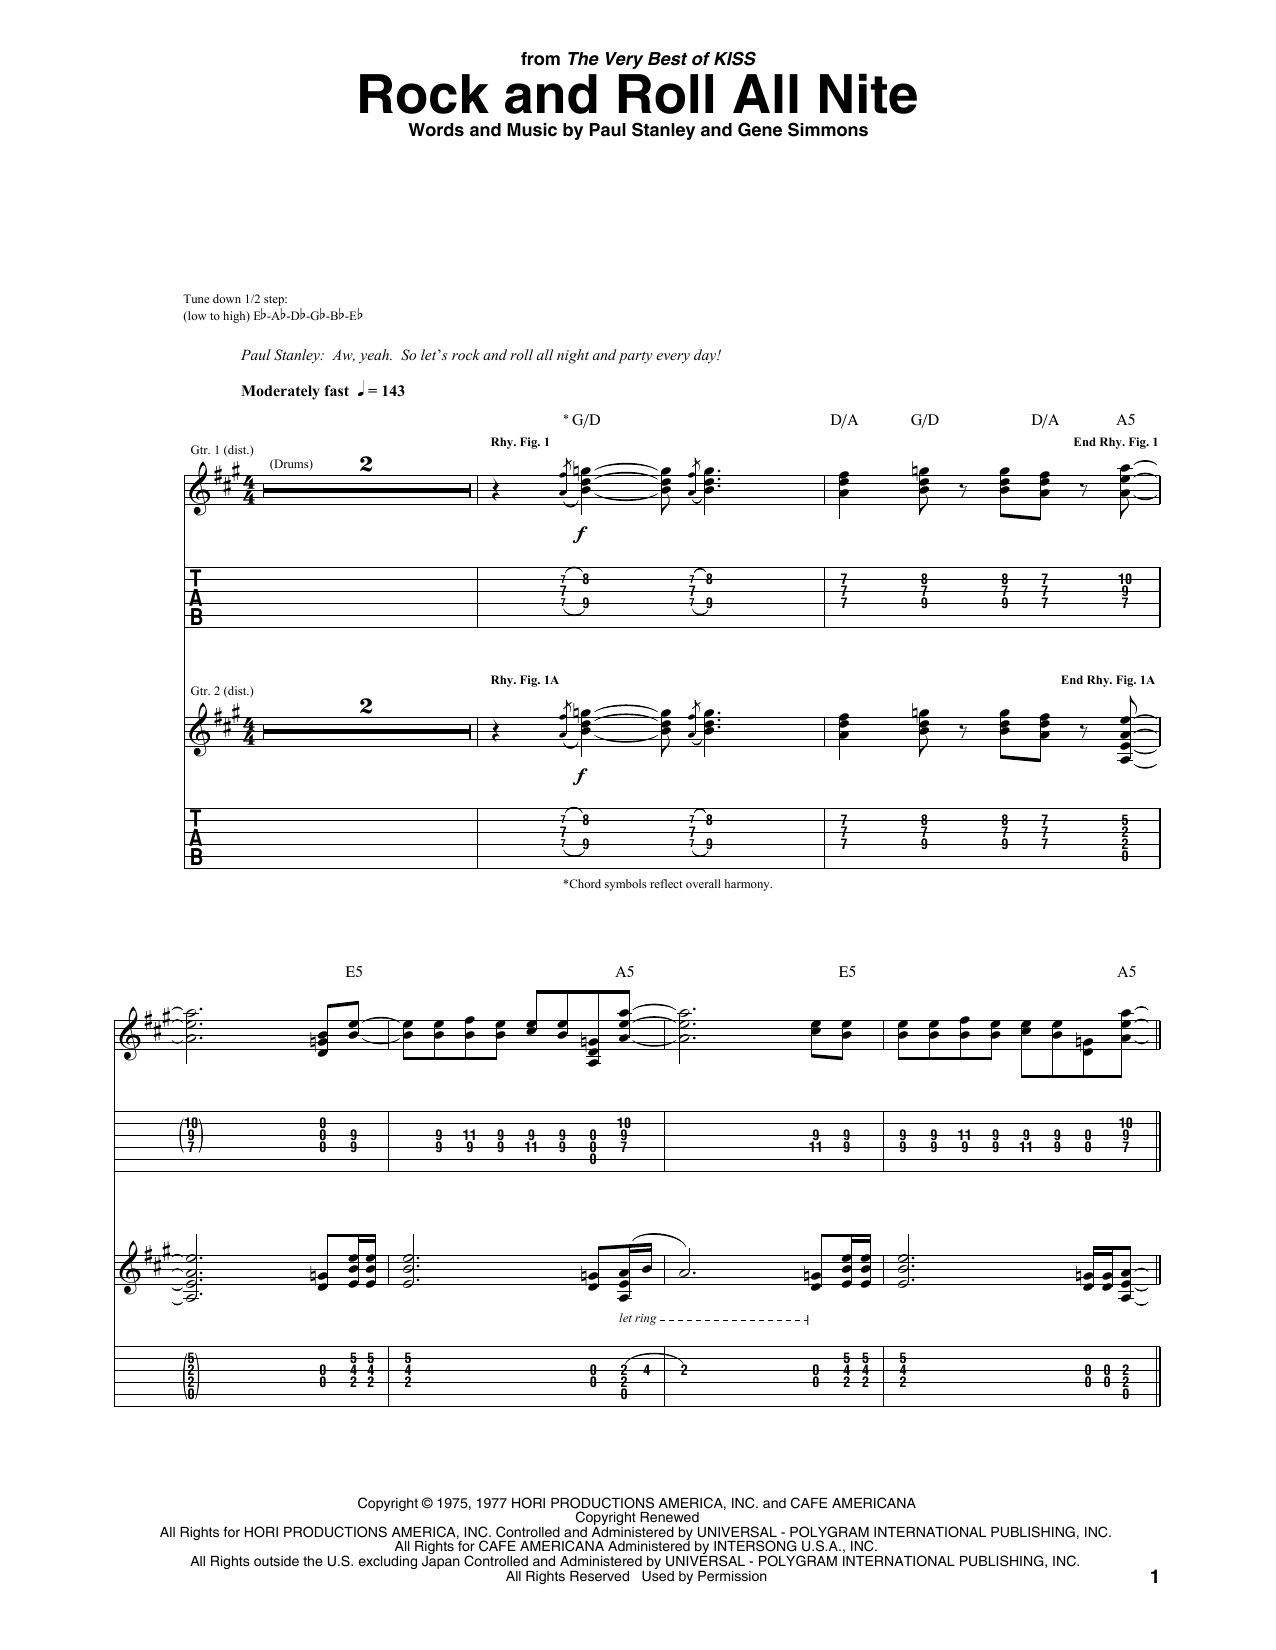 Download KISS Rock And Roll All Nite Sheet Music